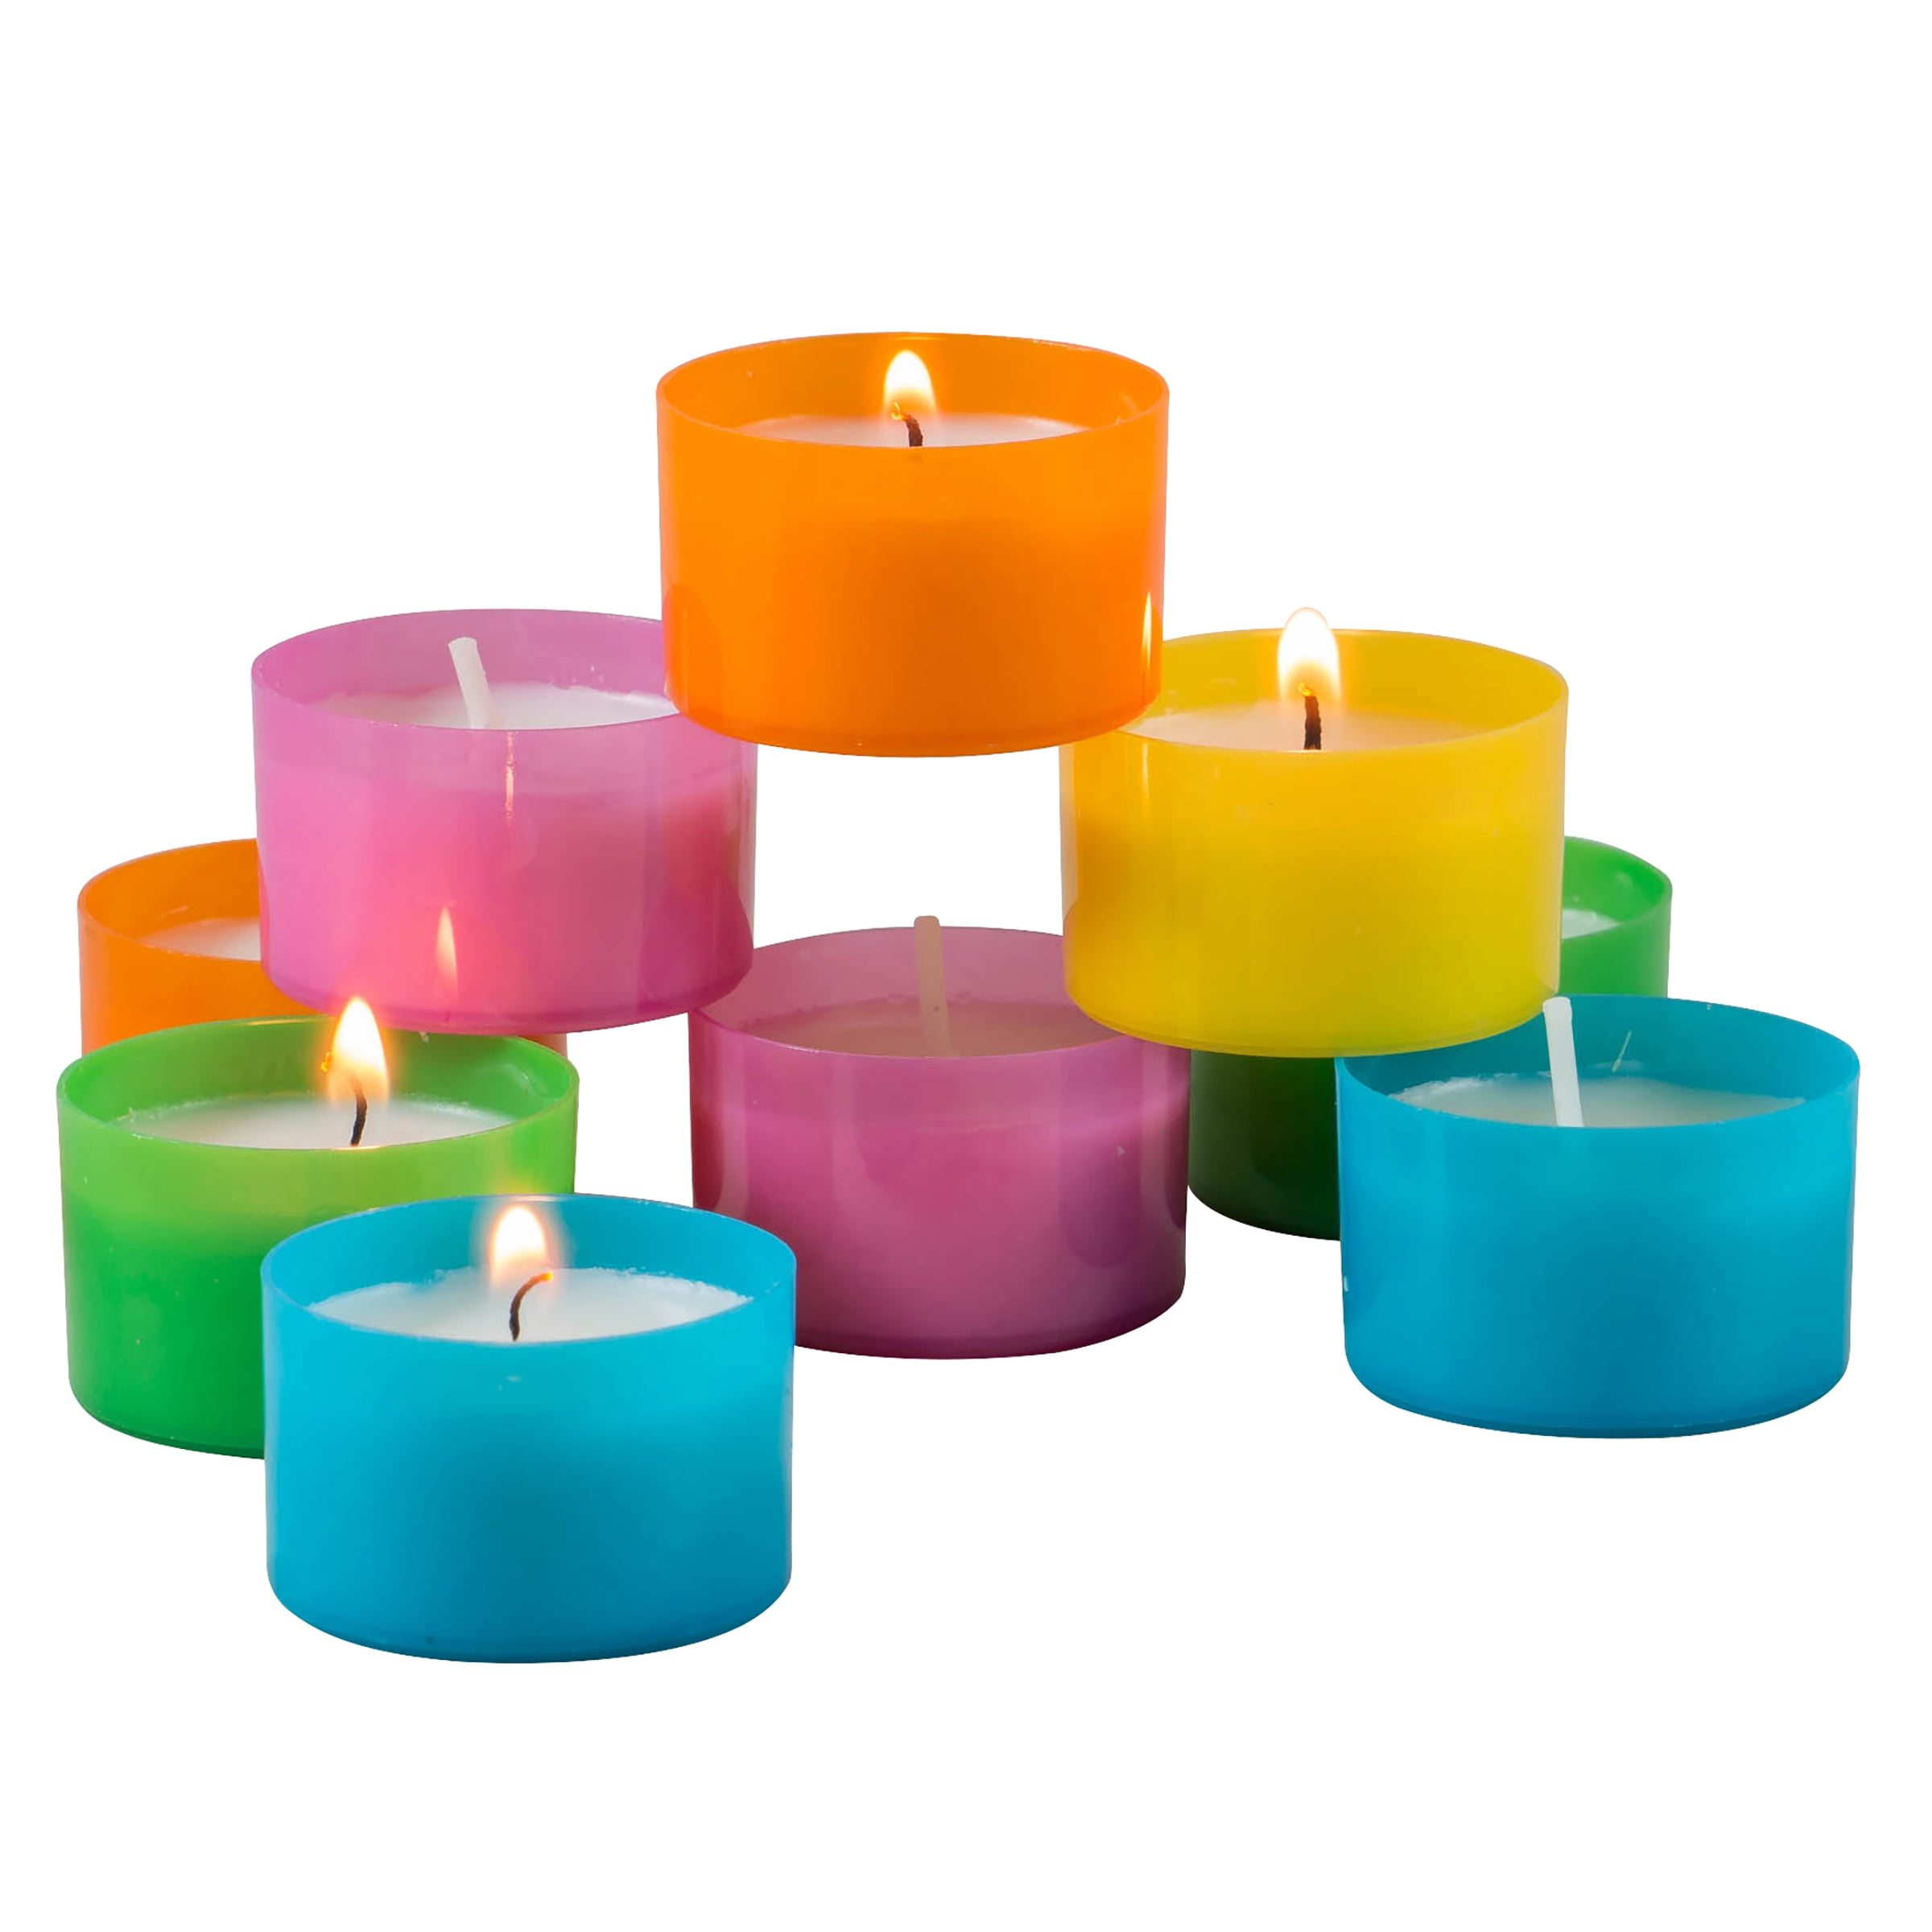 Unscented Tea Lights Candles Round long Burn Small Candle Romantic Valentine New